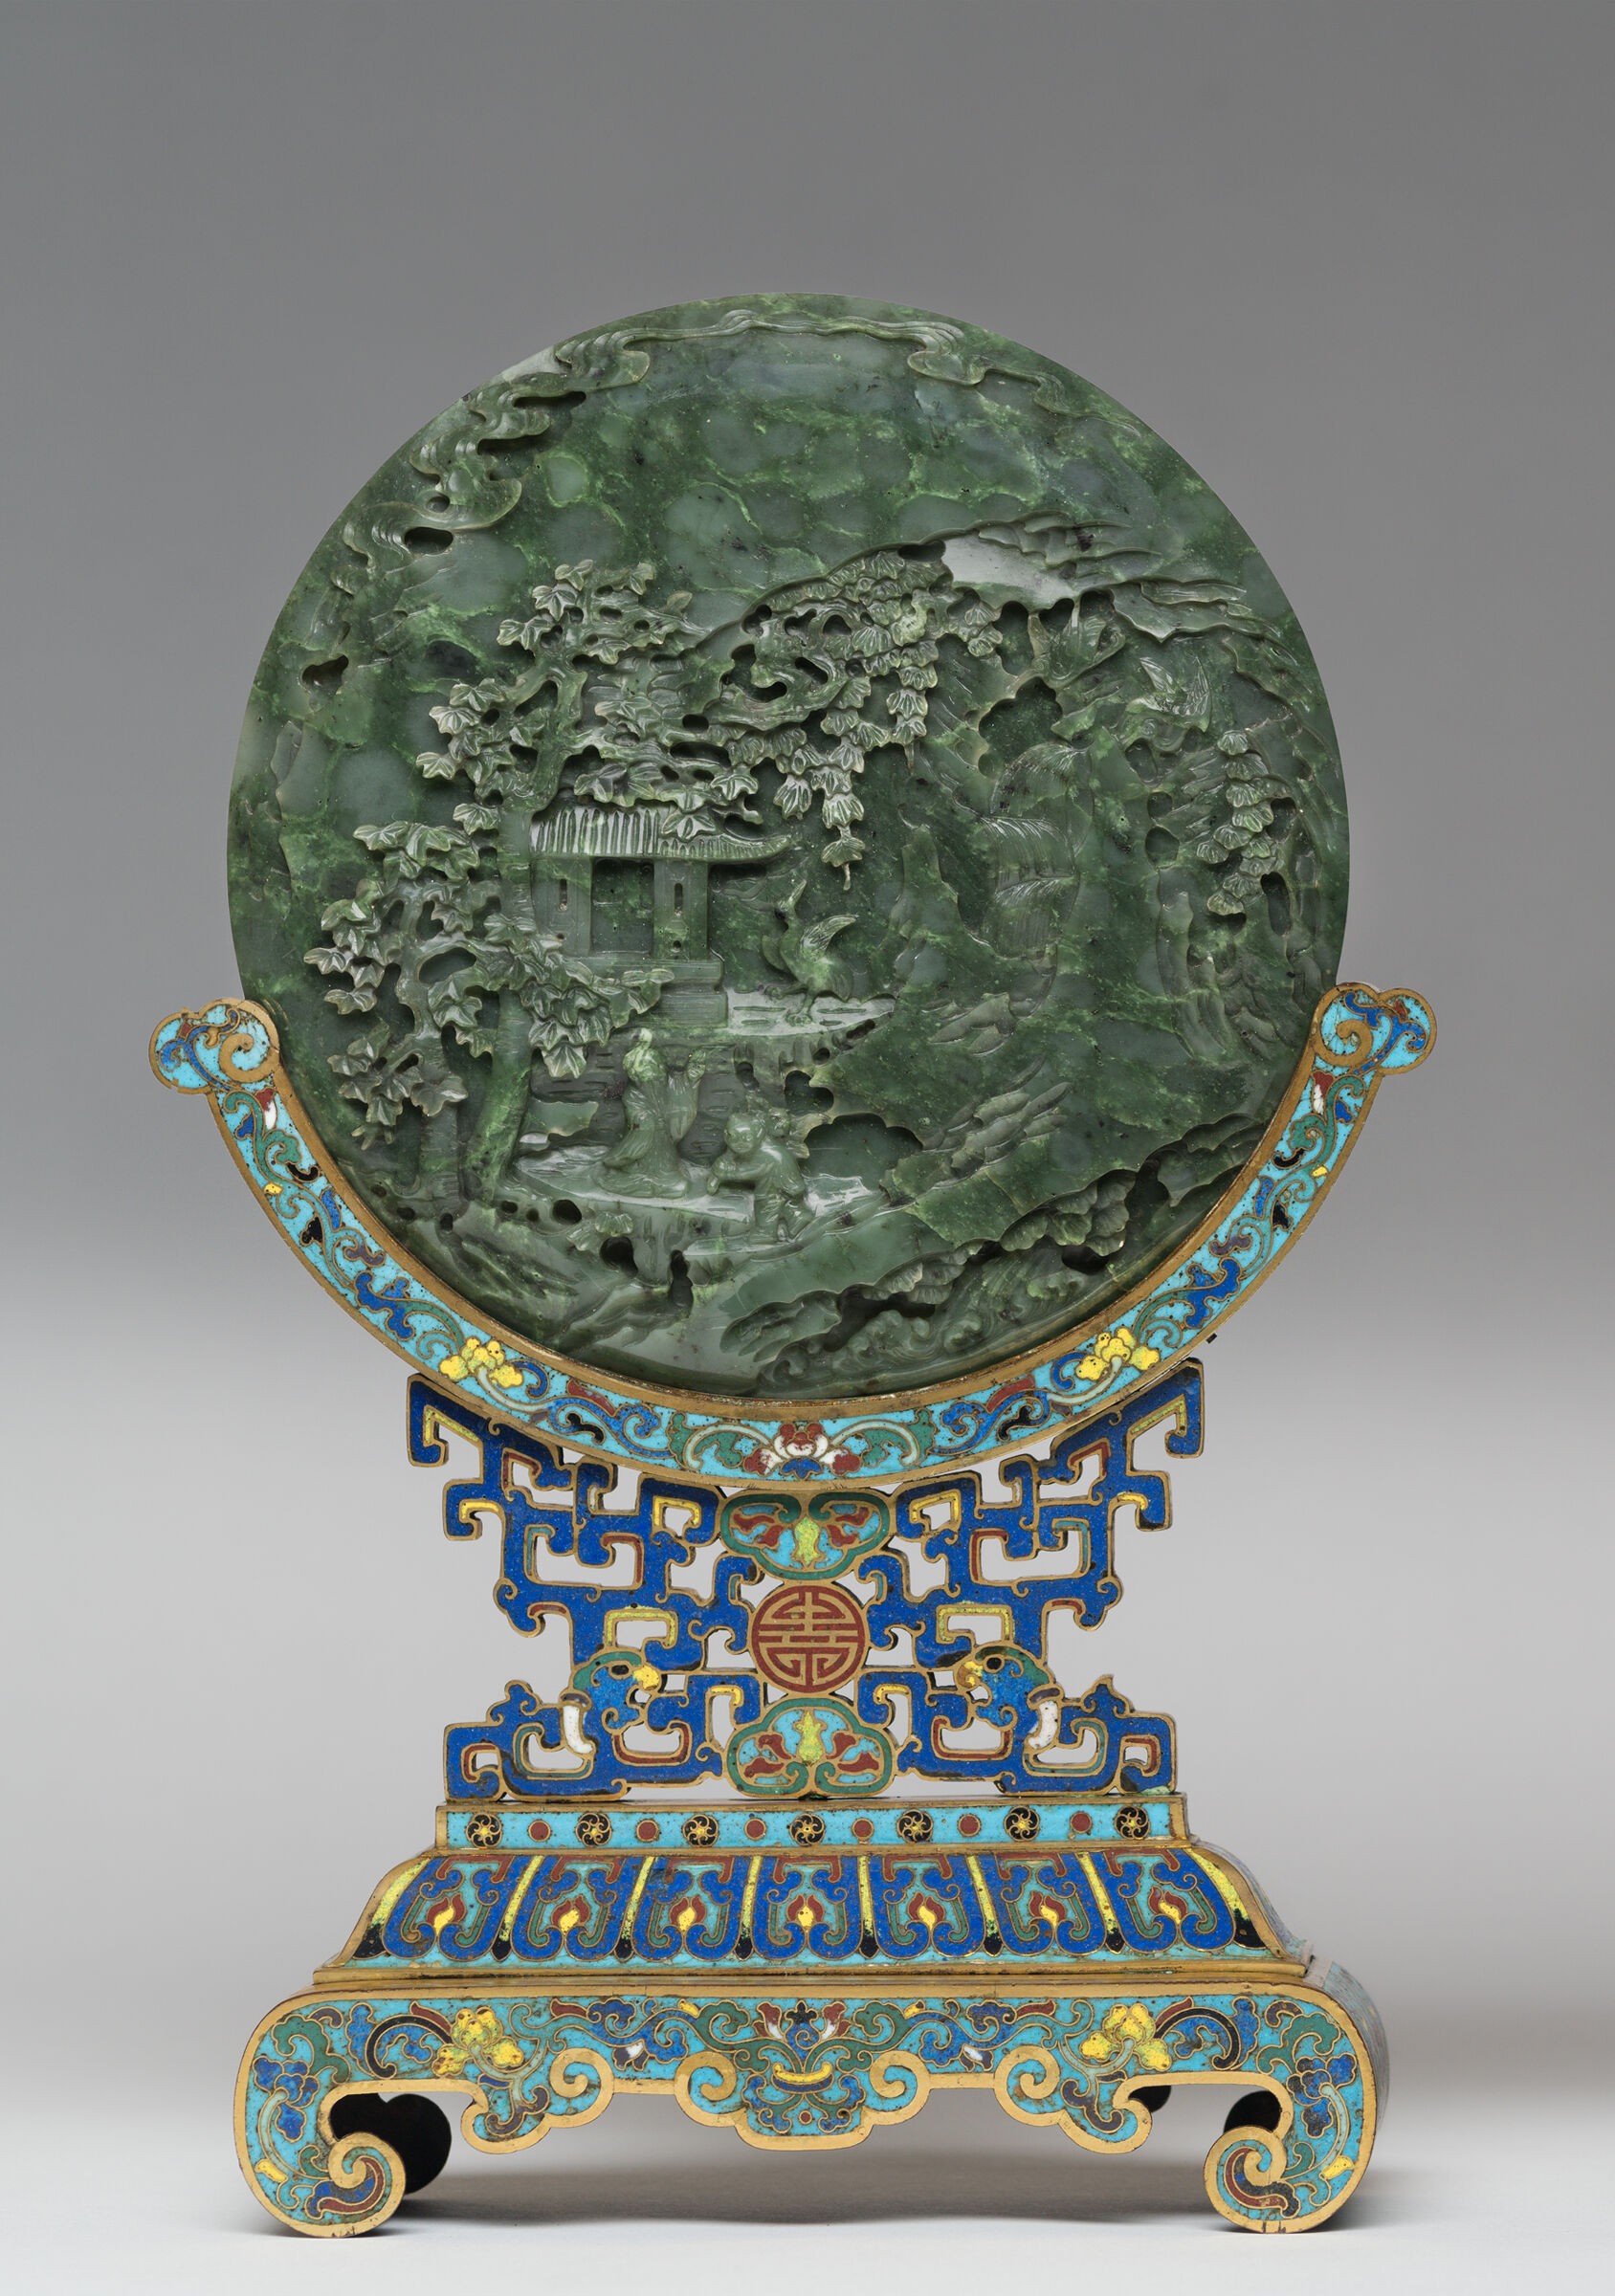 Jade Circular Table Screen With Decoration Of Figures In A Landscape On The Front And Trees And Mountains On The Back, Mounted On A Cloisonné Stand